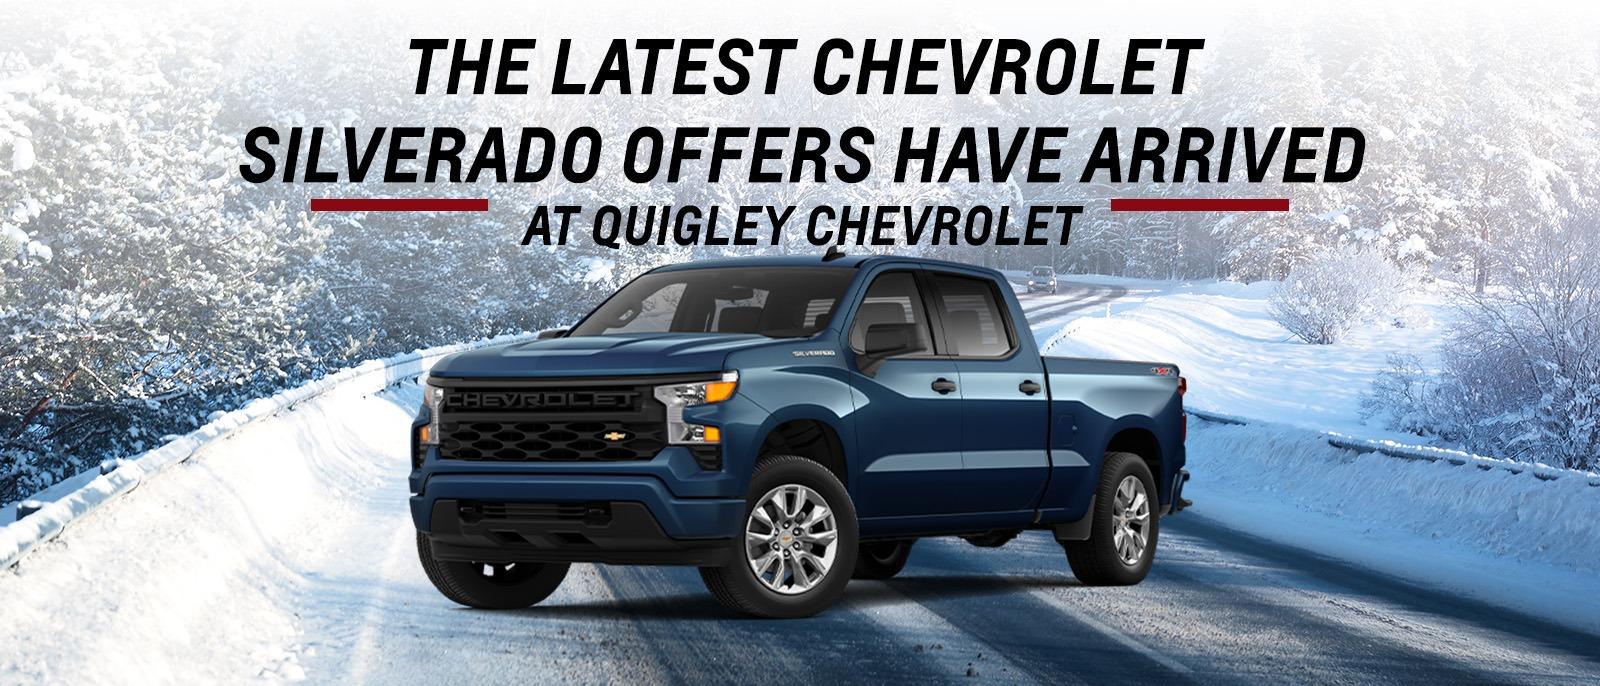 THE LATEST CHEVROLET SILVERADO OFFERS HAVE ARRIVED AT QUIGLEY CHEVROLET